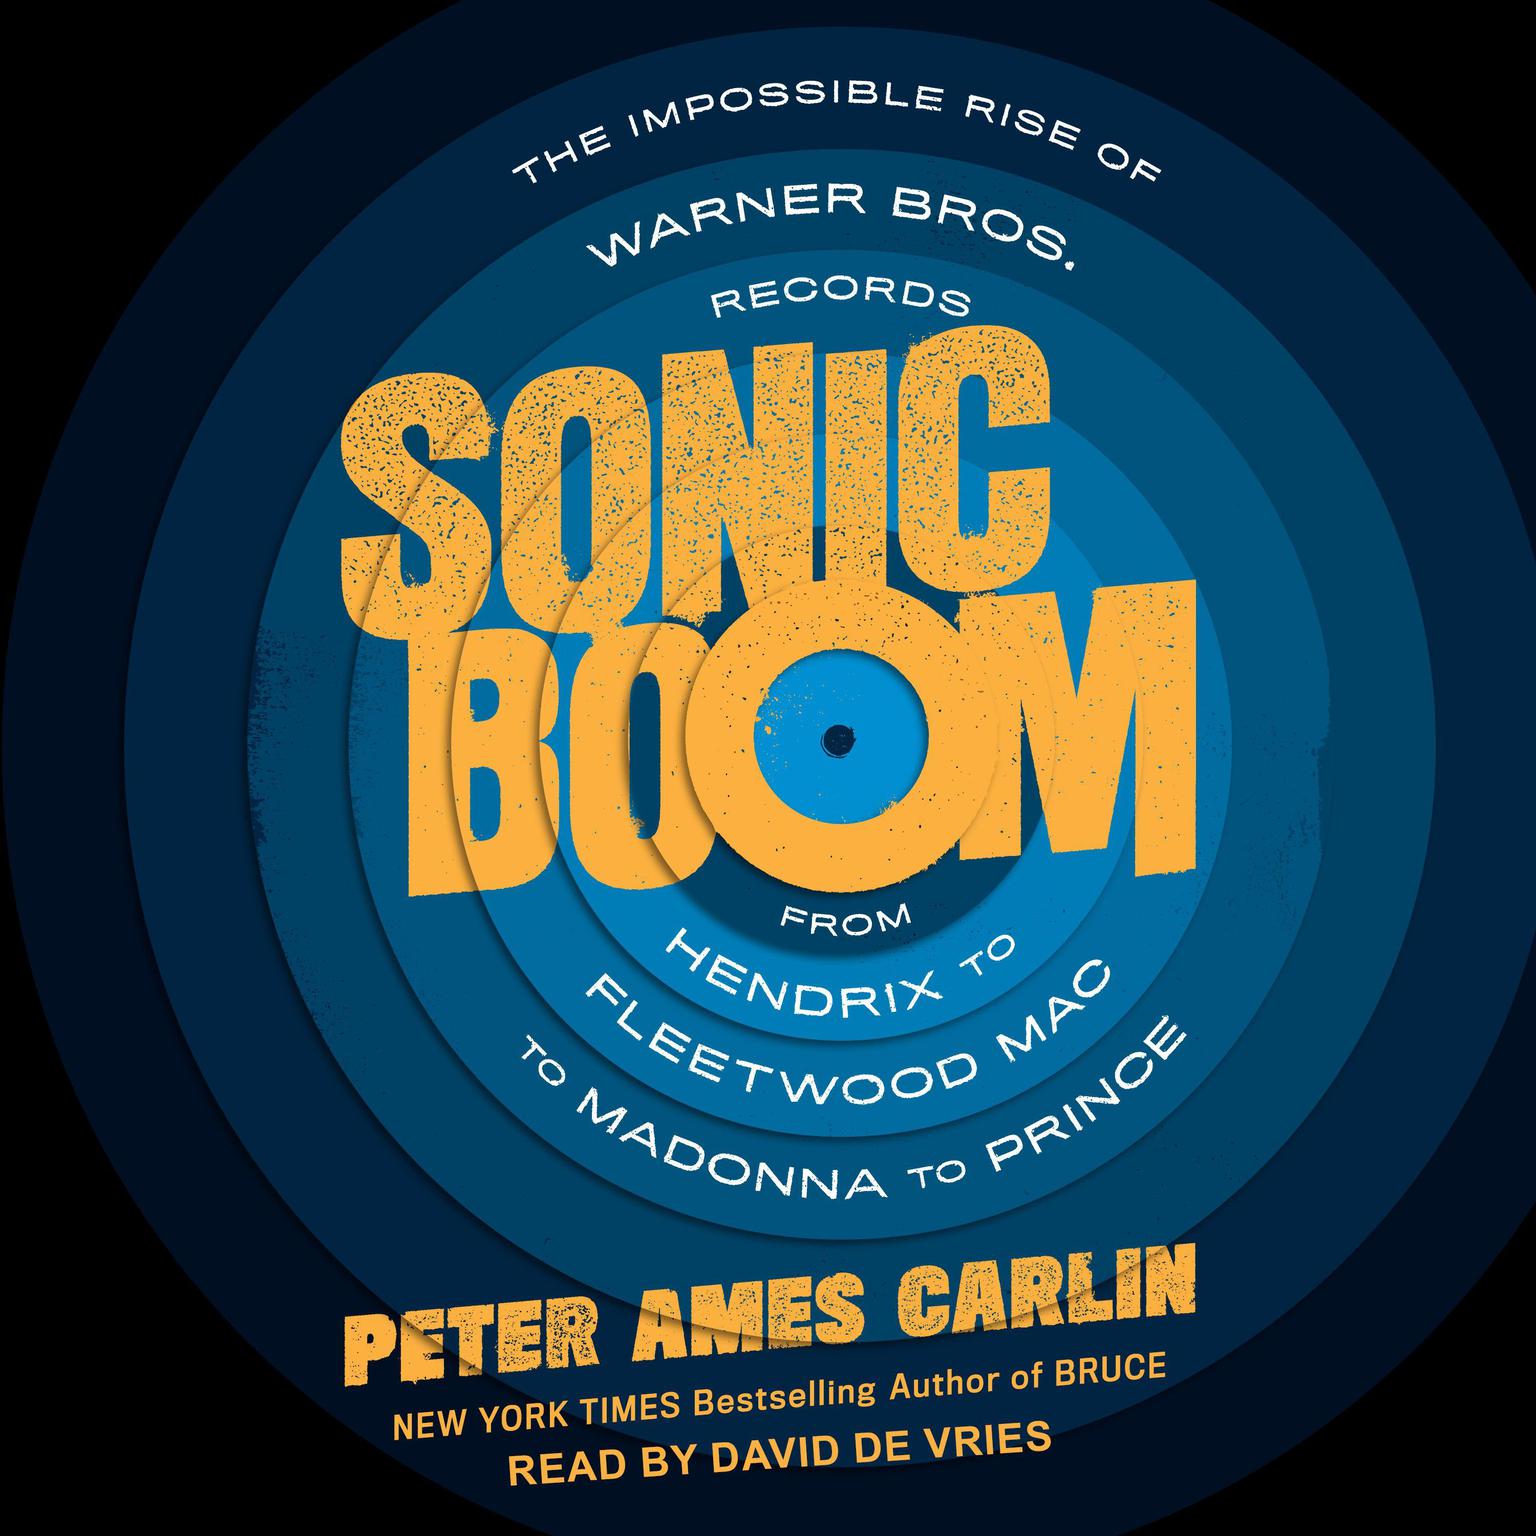 Sonic Boom: The Impossible Rise of Warner Bros. Records, From Hendrix to Fleetwood Mac to Madonna to Prince Audiobook, by Peter Ames Carlin